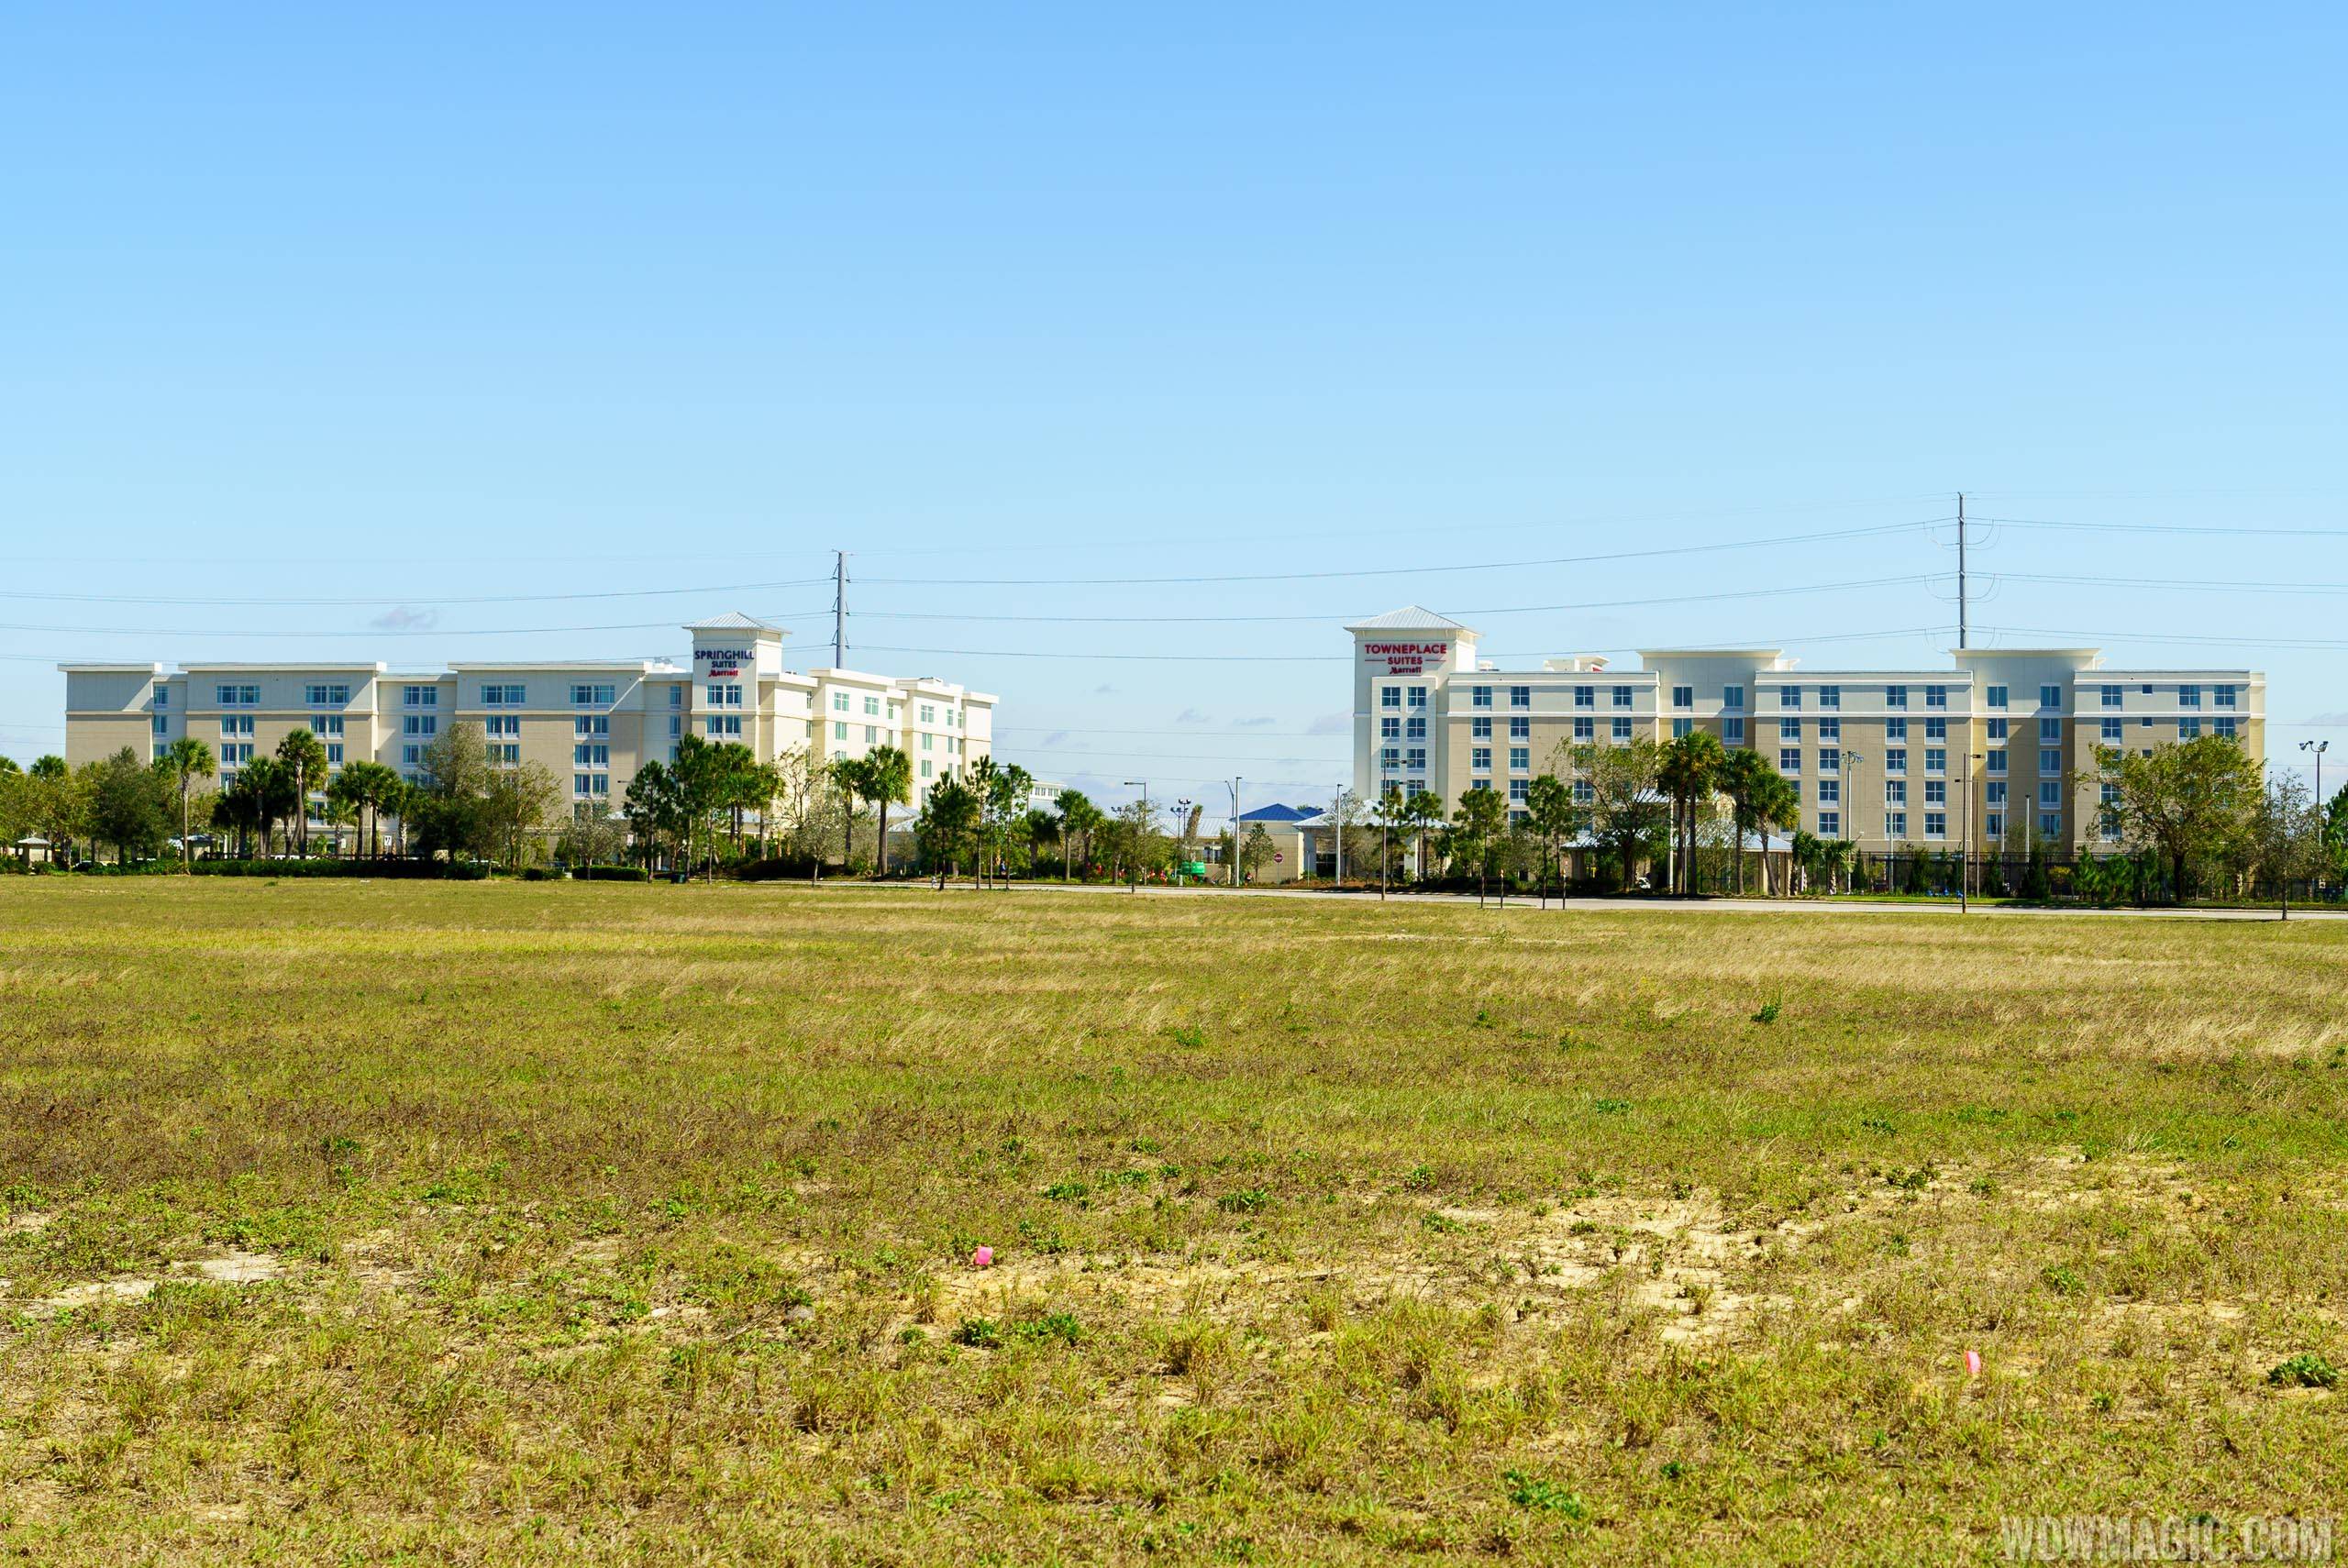 TownPlace Suites and SpringHill Suites at Flamingo Crossing